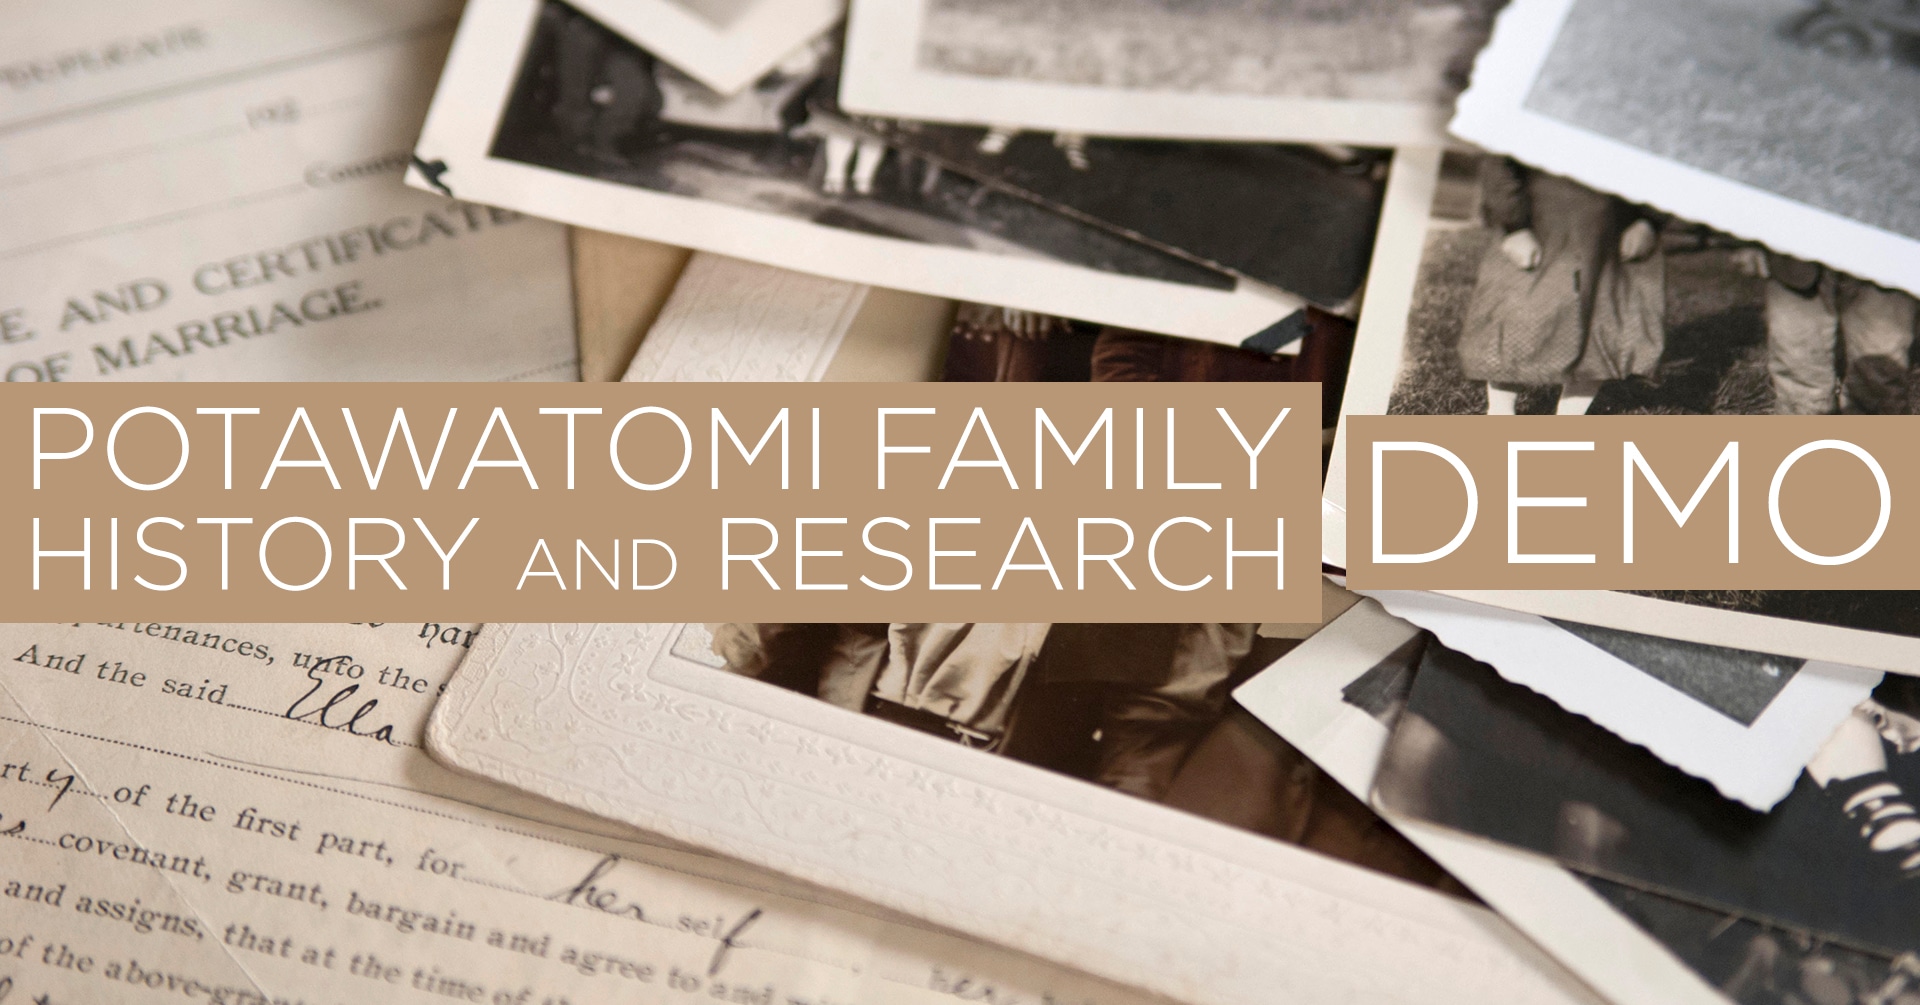 Potawatomi Family History and Research Demonstration